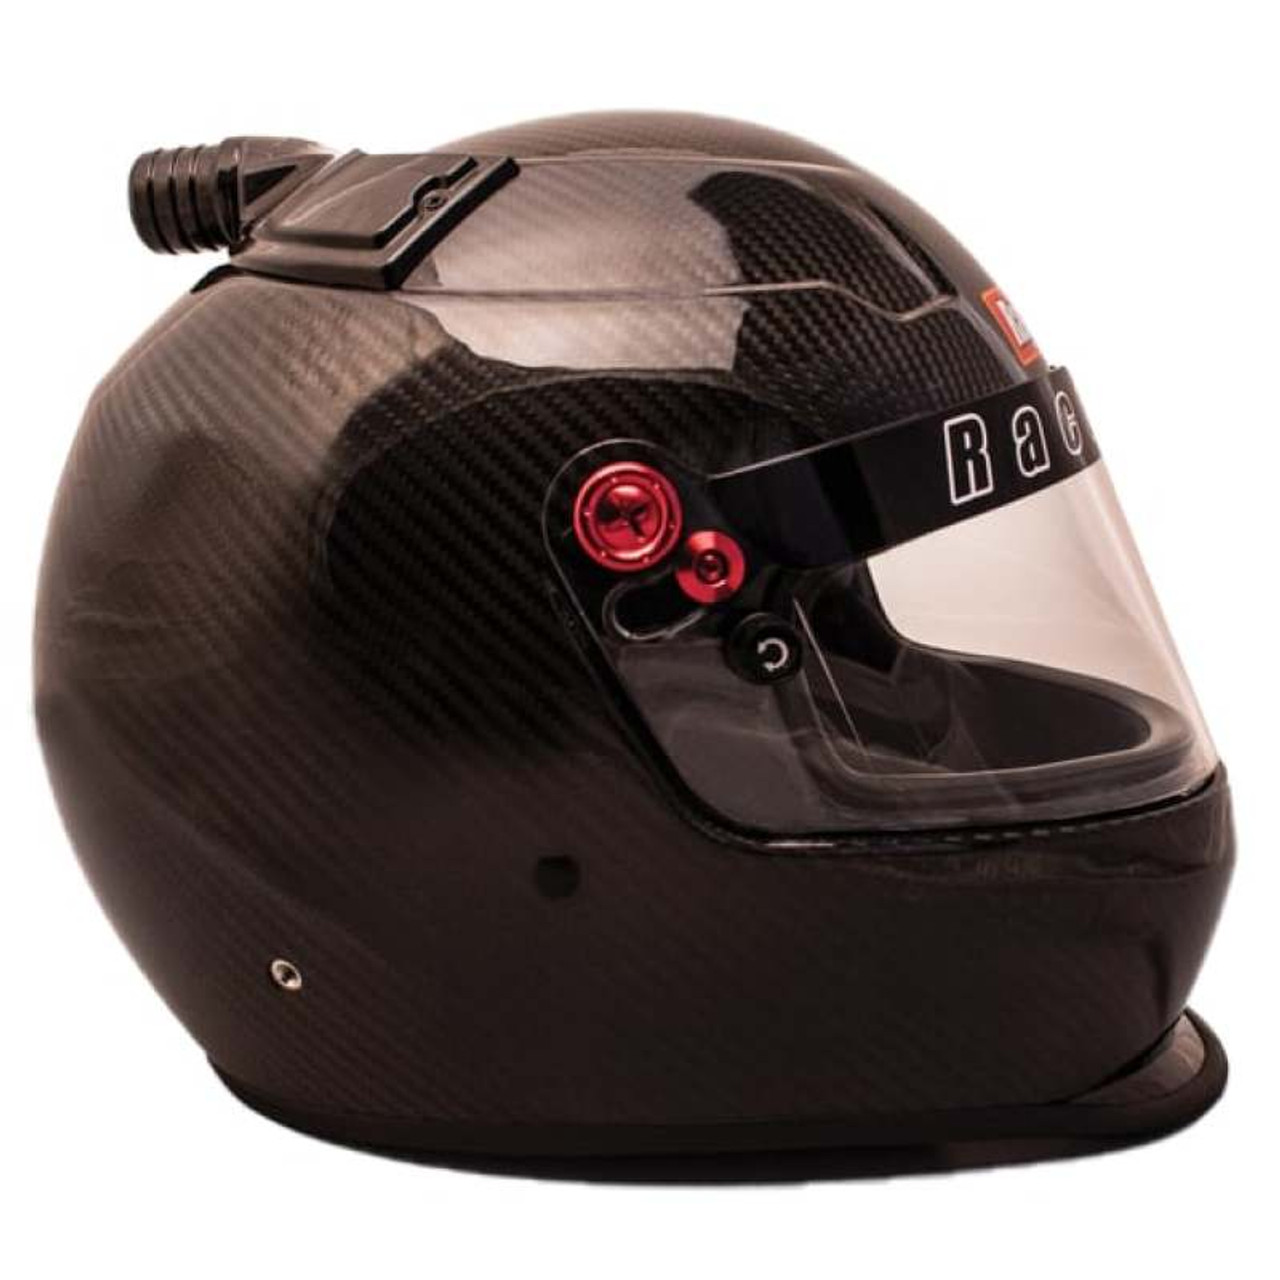 RaceQuip PRO20 Side Air Helmet Snell SA2020 Rated / Carbon Fiber -X Large - 92969069 User 1